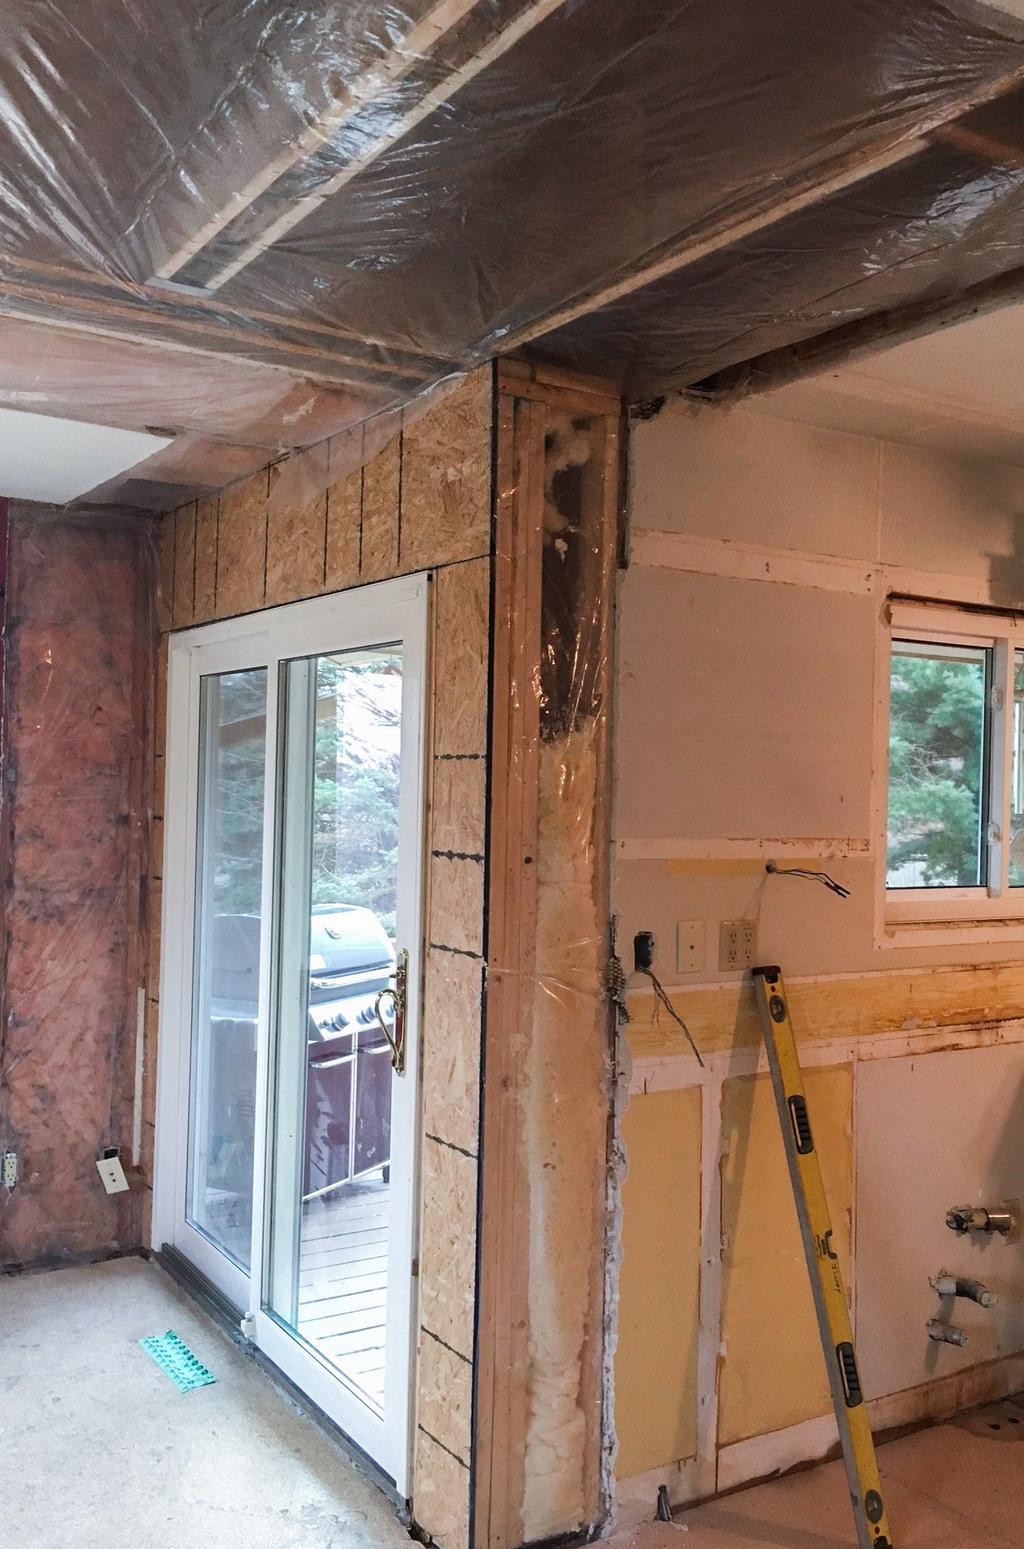 TIMELINE AND BUDGET BUSTED, RELATIONSHIPS BUILT Try as we did to save the homeowner money, there was no getting around the fact that fixing this level of destruction was going to take time and be